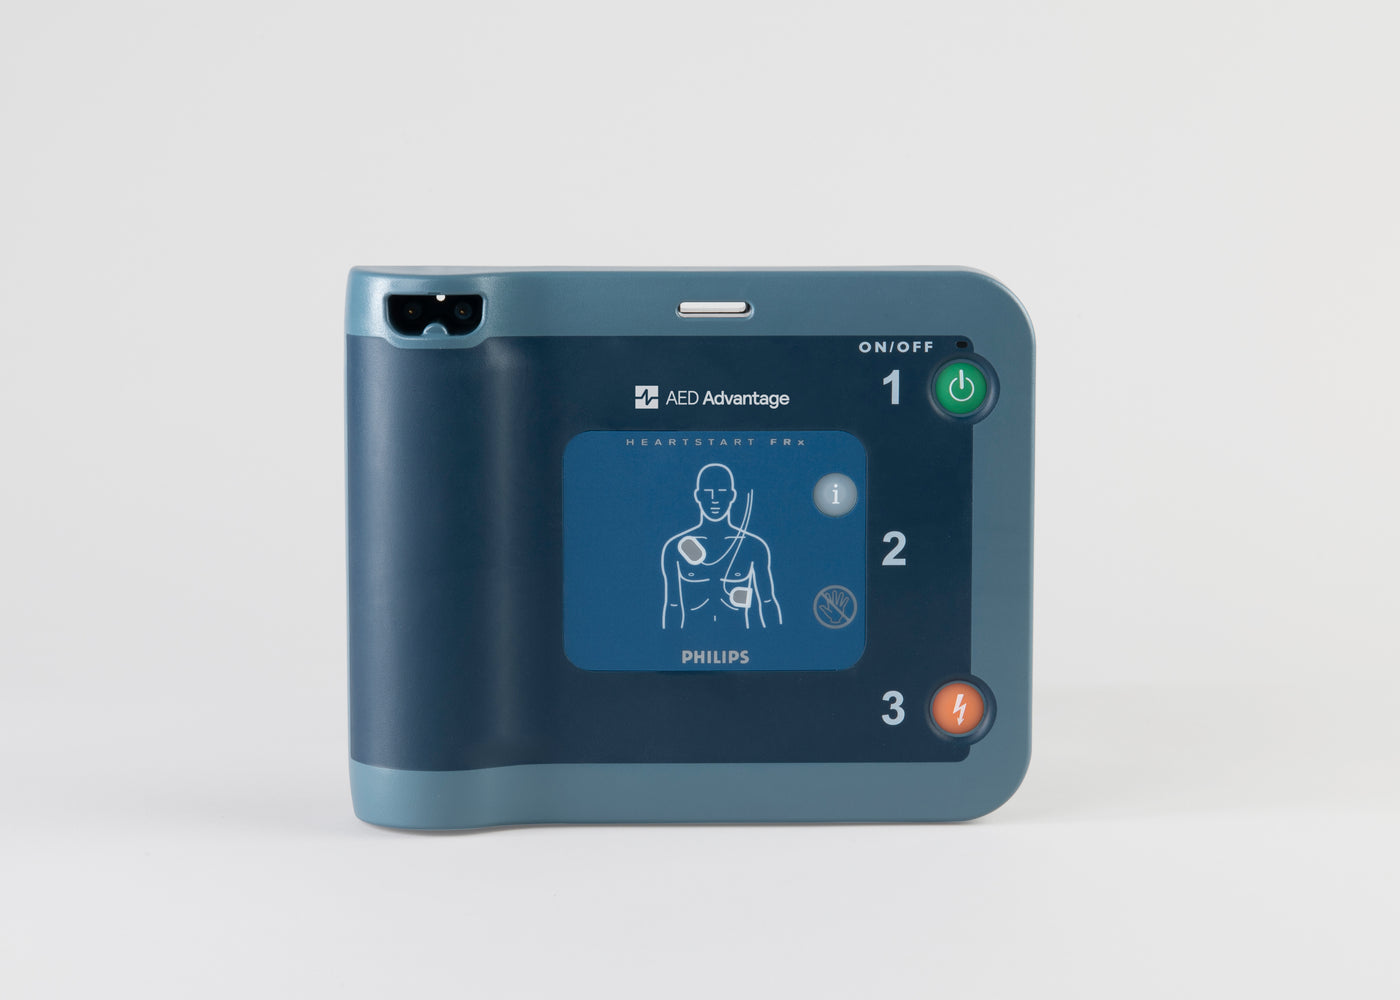 A blue Philips FRx AED